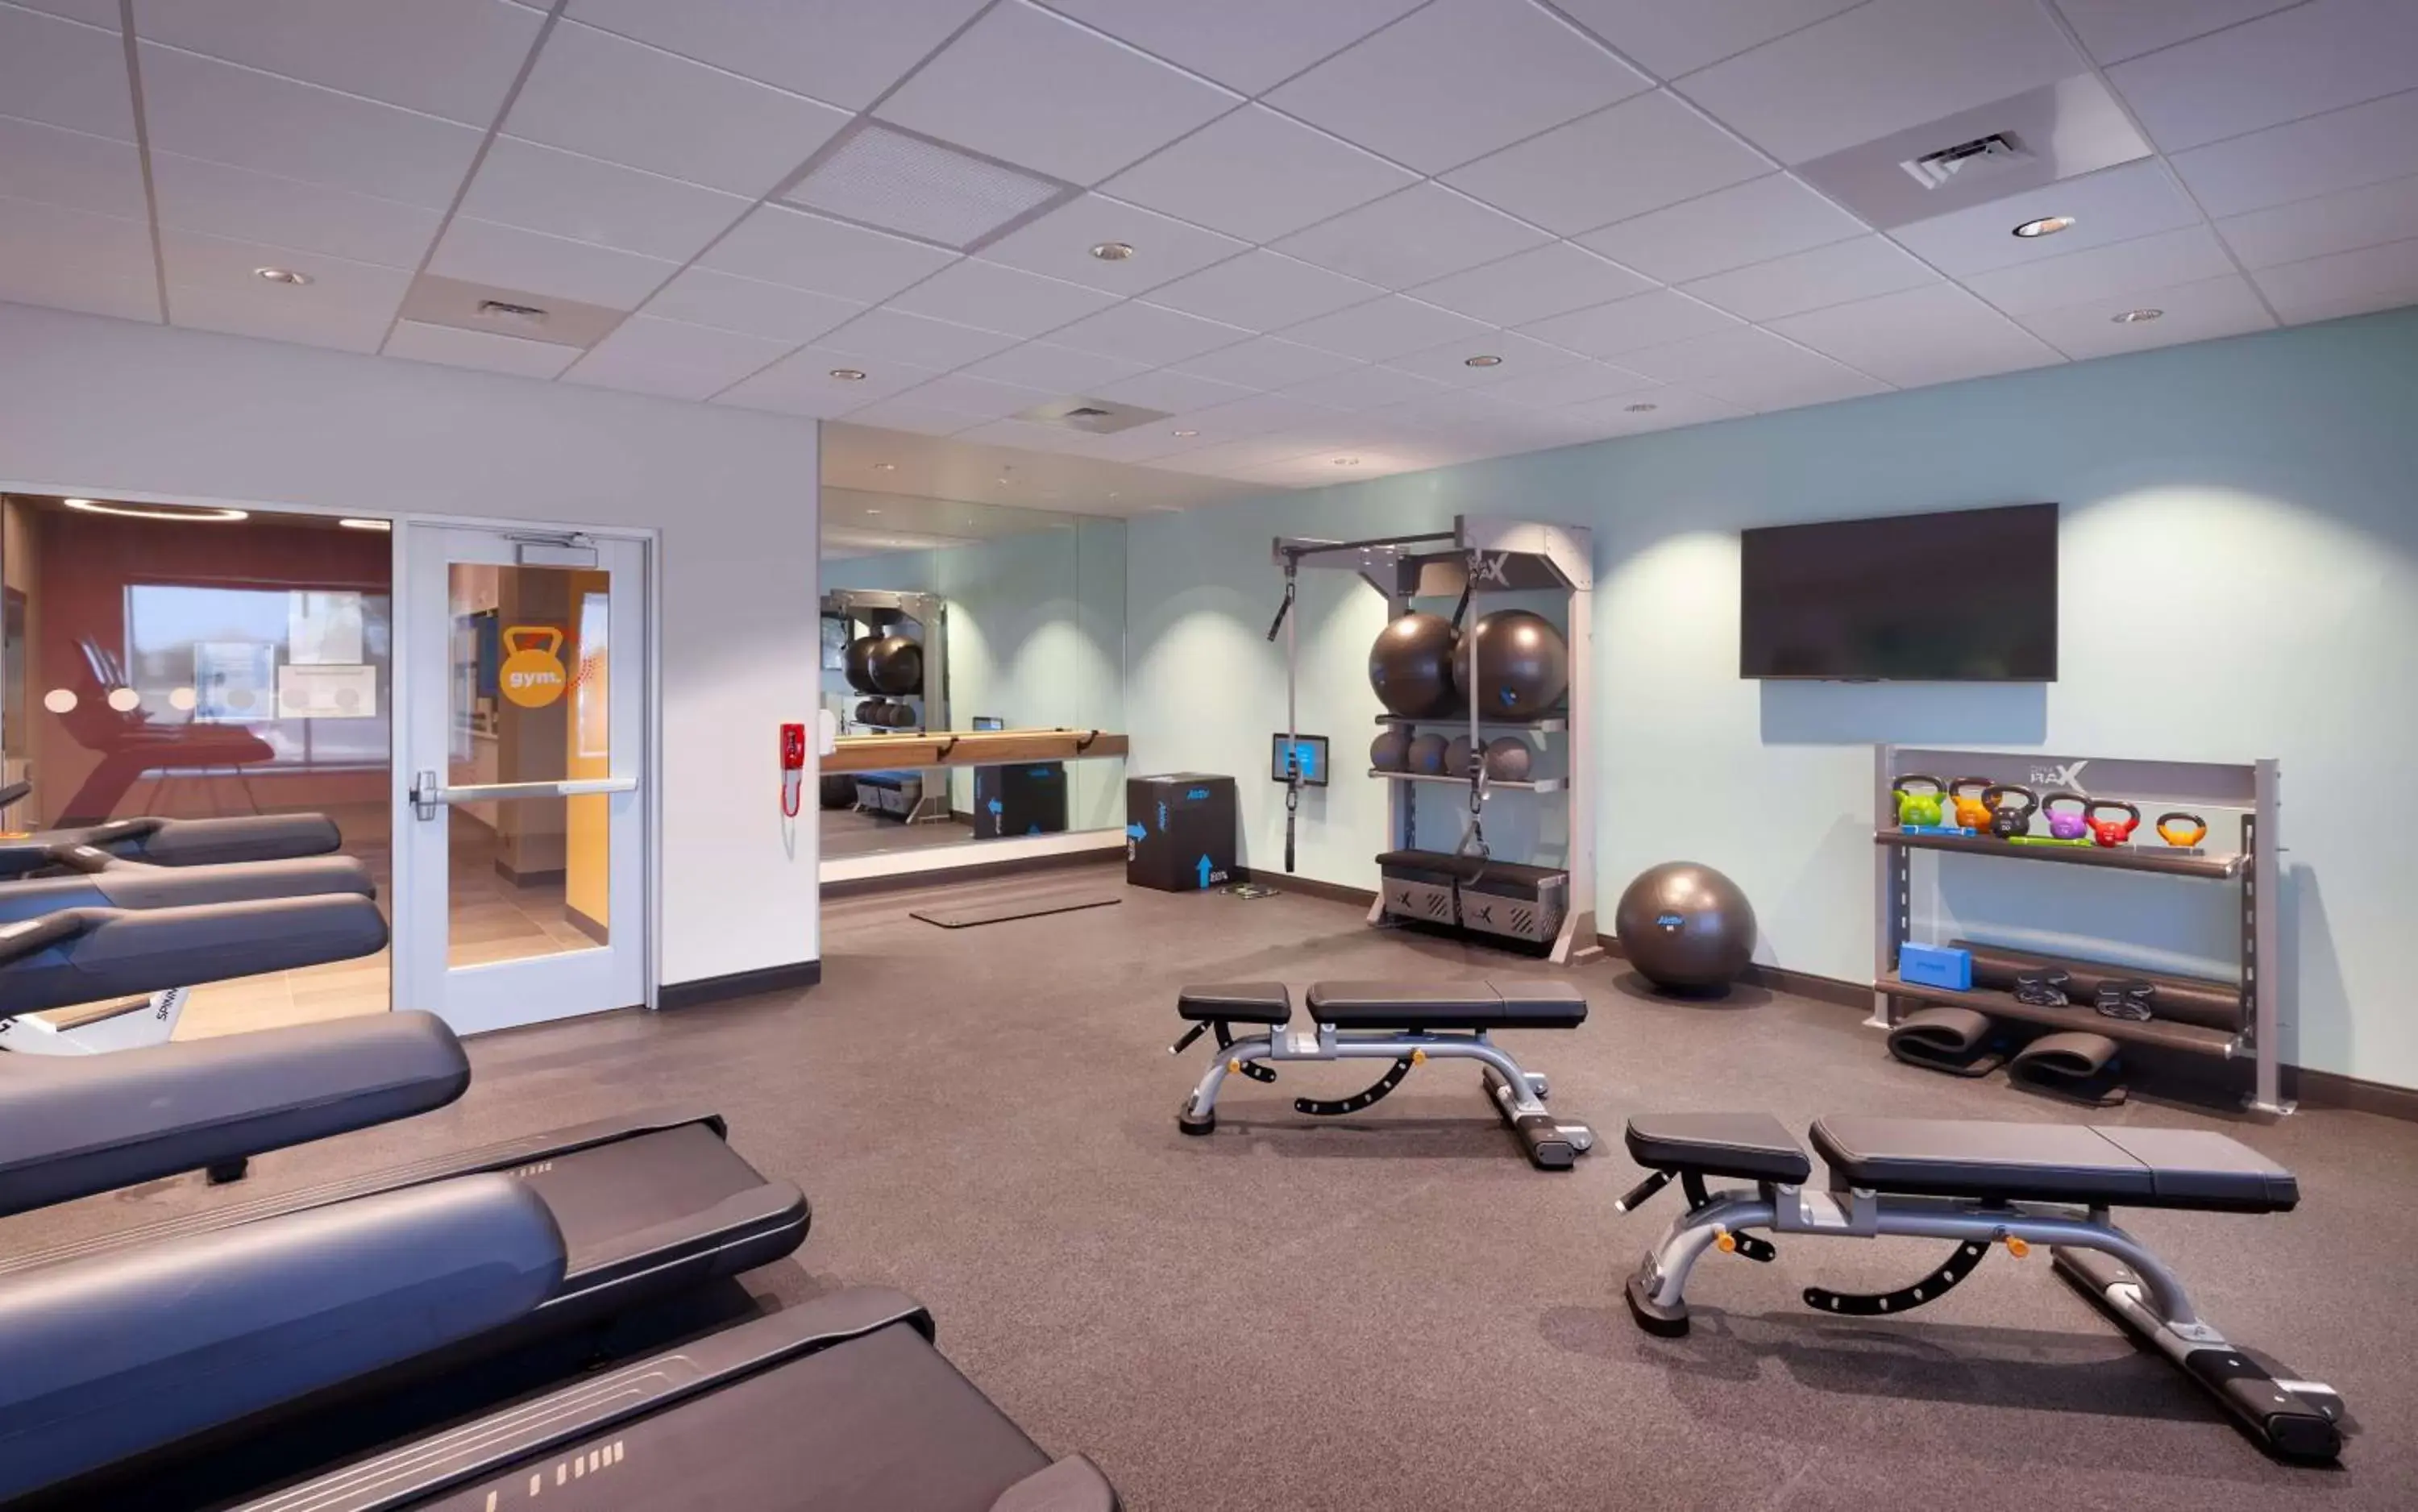 Fitness centre/facilities, Fitness Center/Facilities in Tru By Hilton Clearfield Hill Air Force Base, Ut